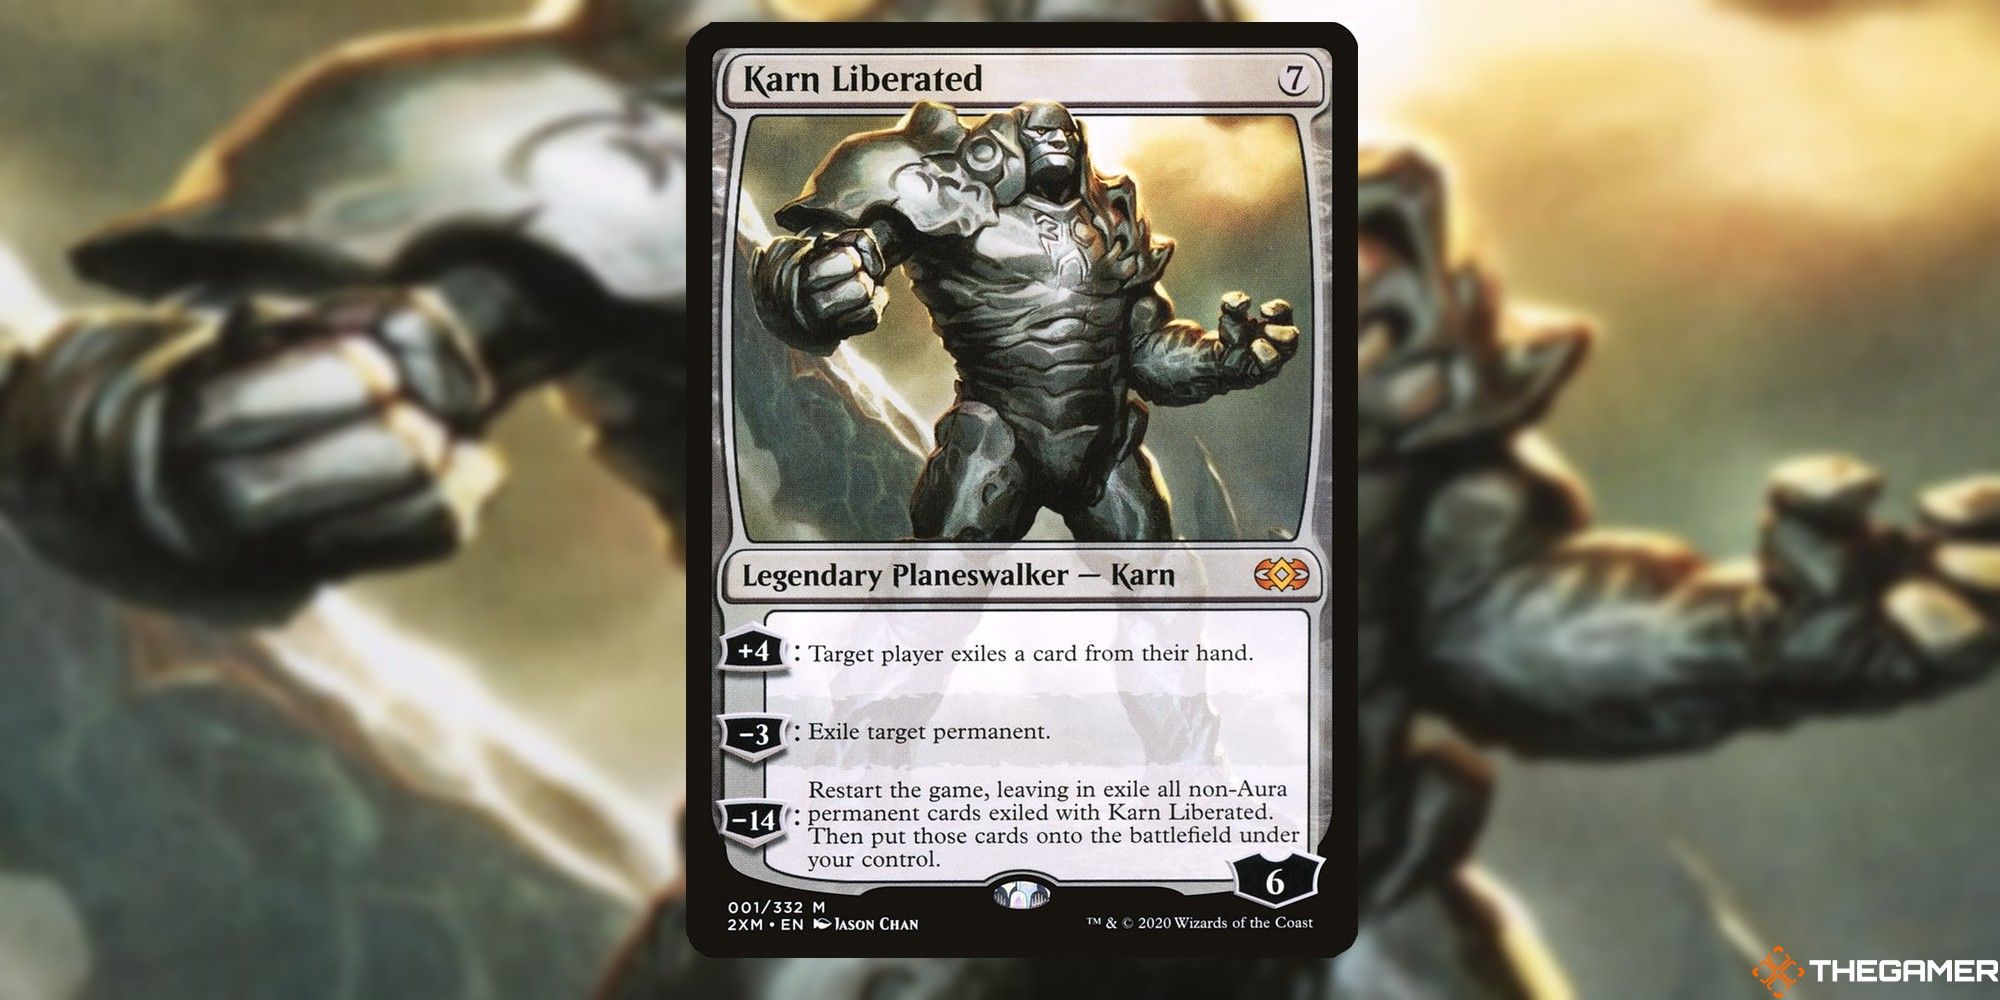 Karn Liberated card and art background